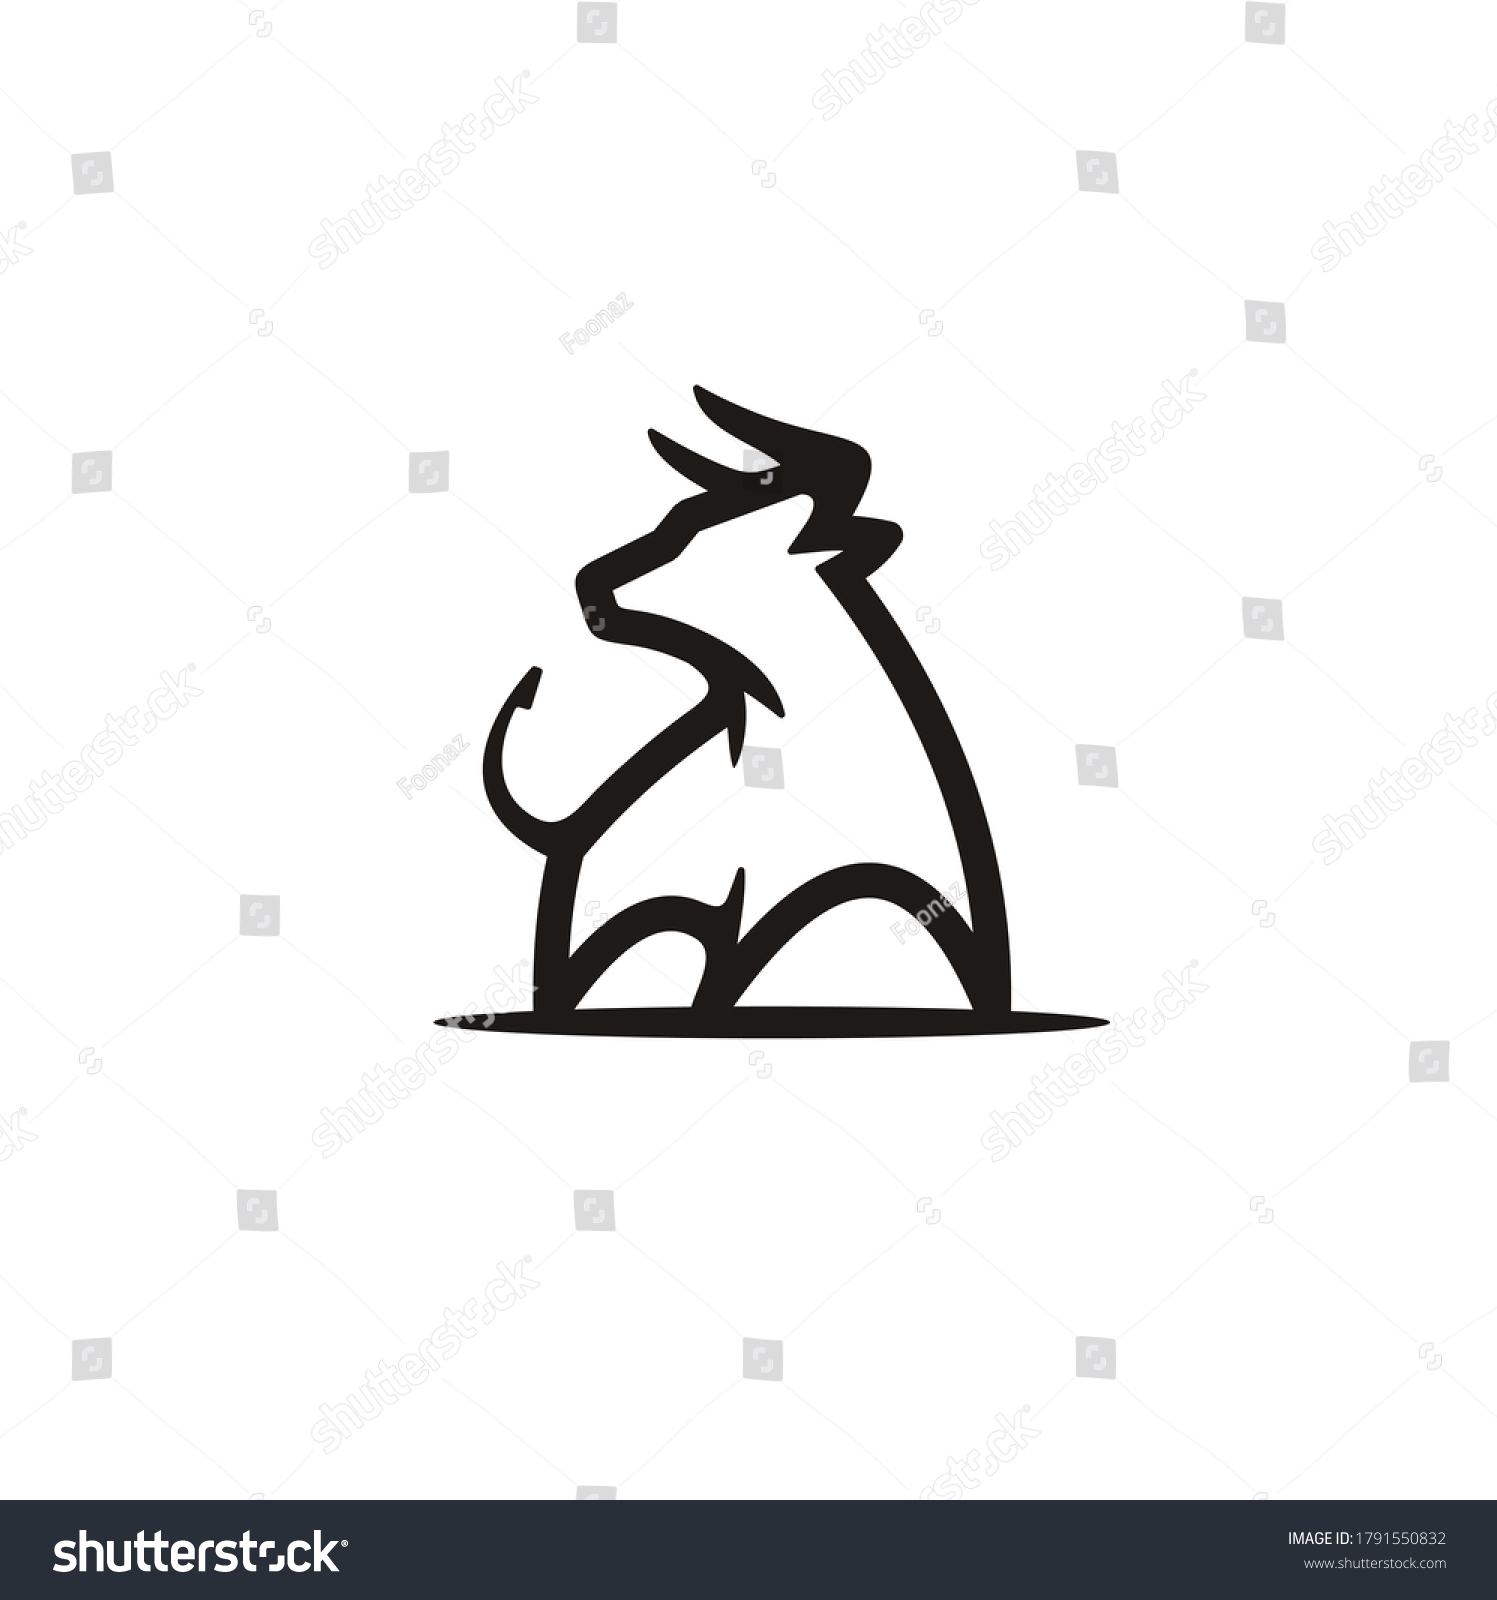 SVG of Simple Strong Buffalo Bull silhouette, Classic Vintage Retro Matador or Rodeo Long Horn Cattle logo design svg